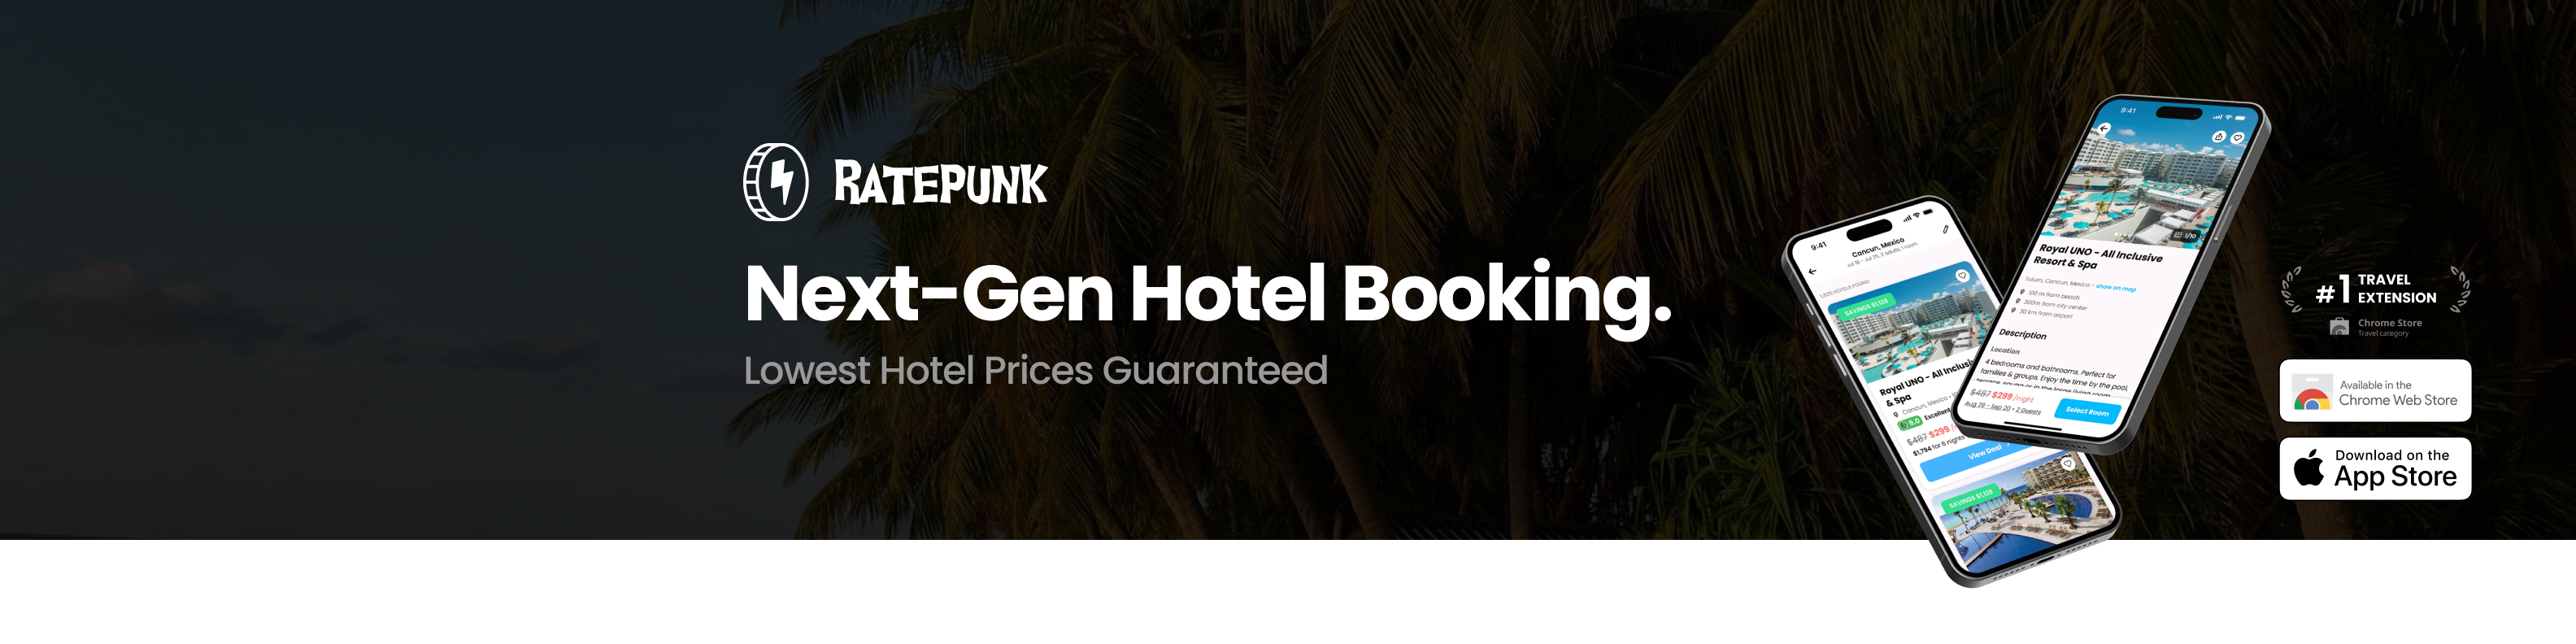 RatePunk - gen hotel booking lowest hotel prices guaranteed 